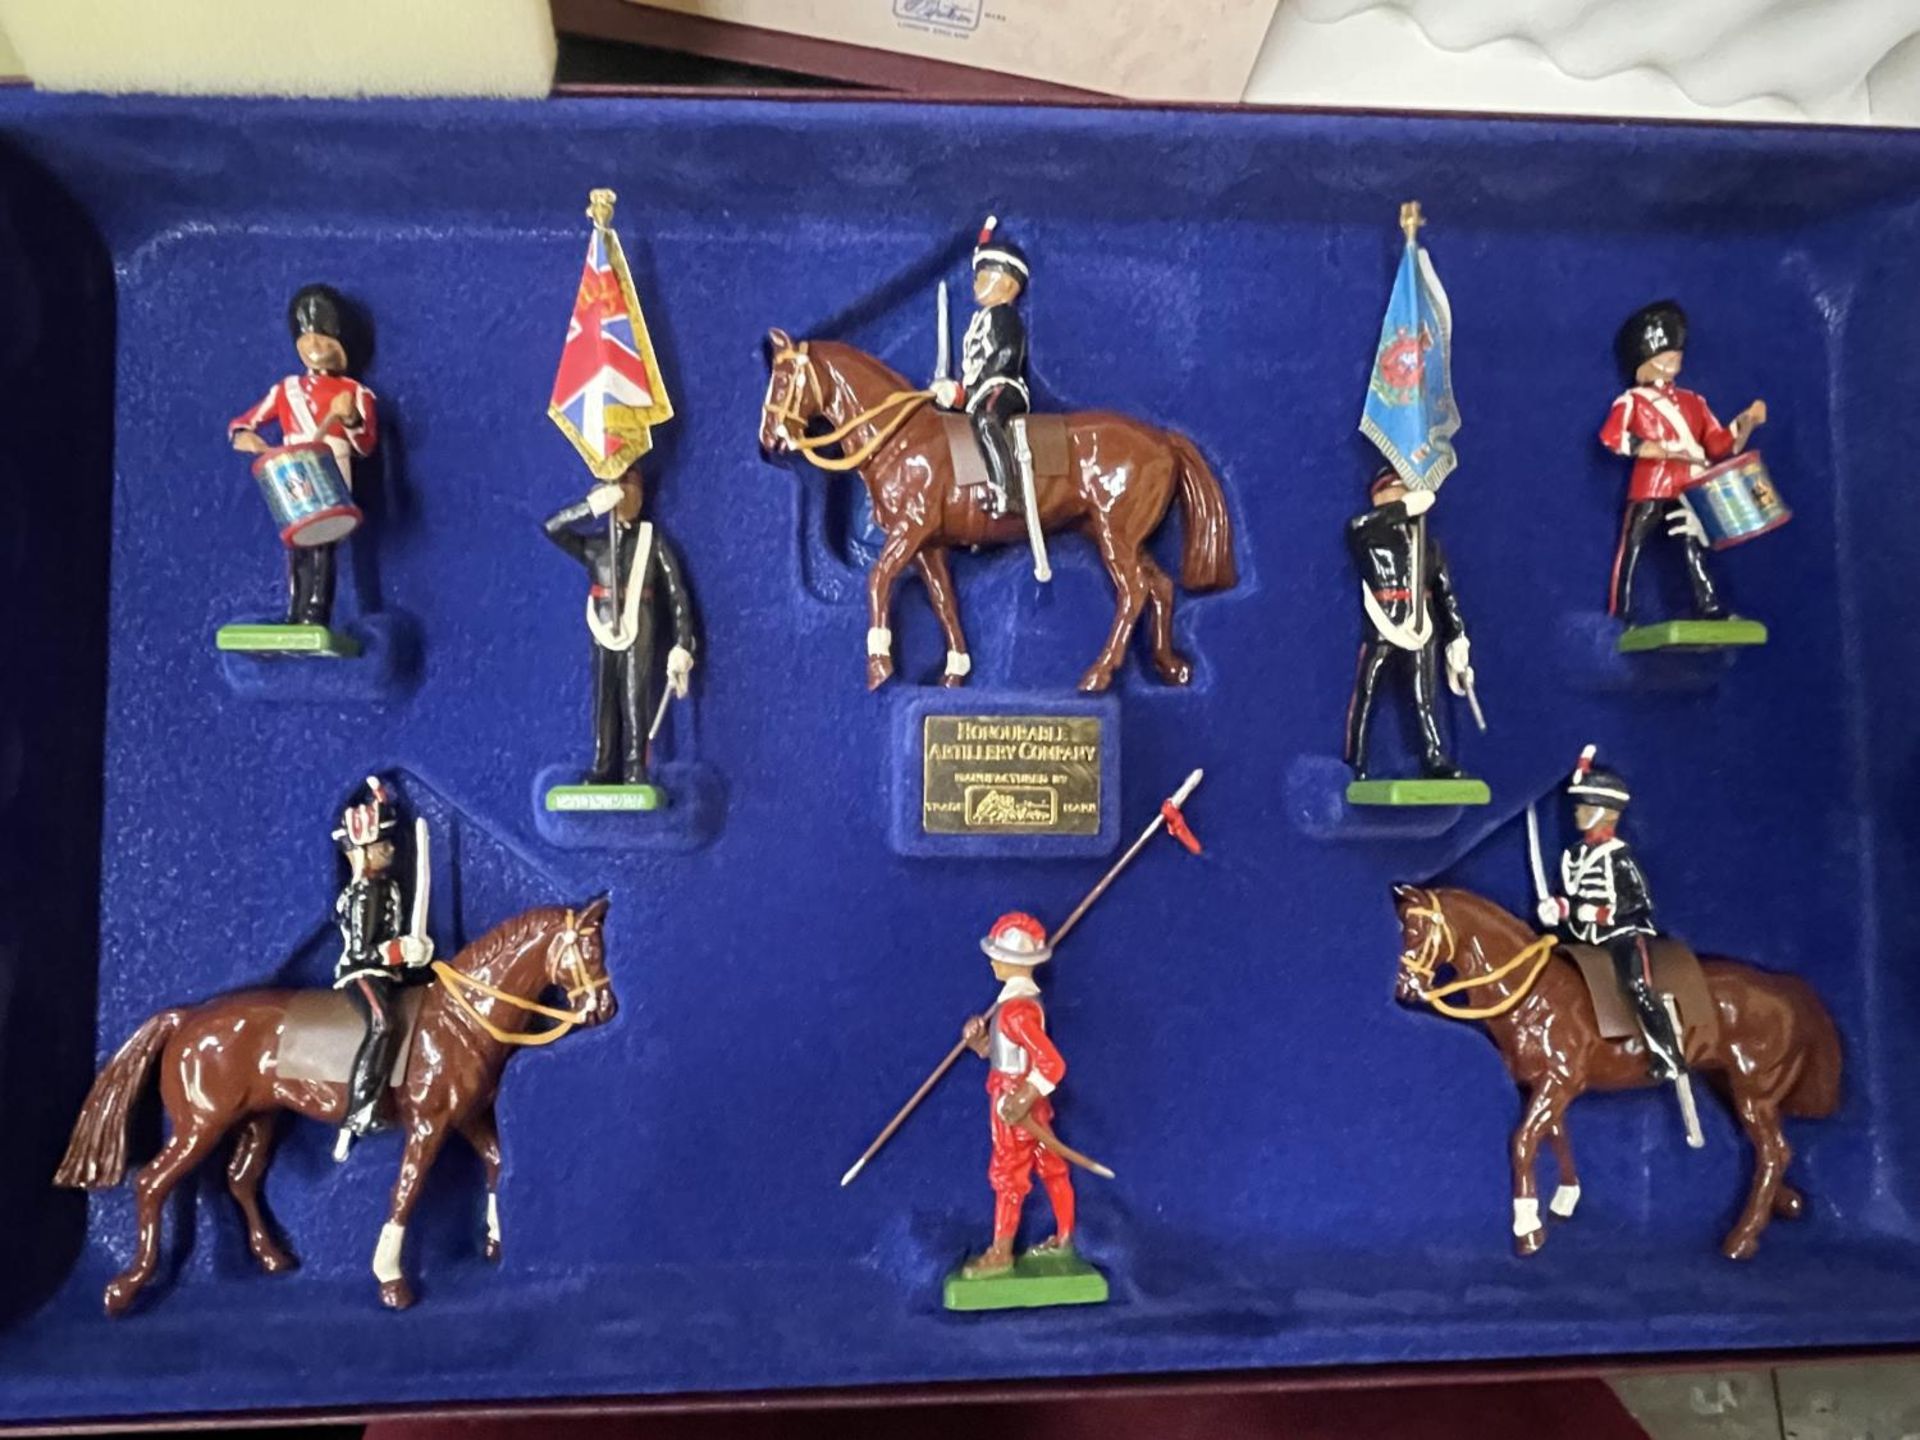 A BOXED BRITAINS TOYS LIMITED EDITION HONOURABLE ARTILLERY COMPANY MODEL SET, NO.2344 OF 7000 SETS - Image 3 of 3